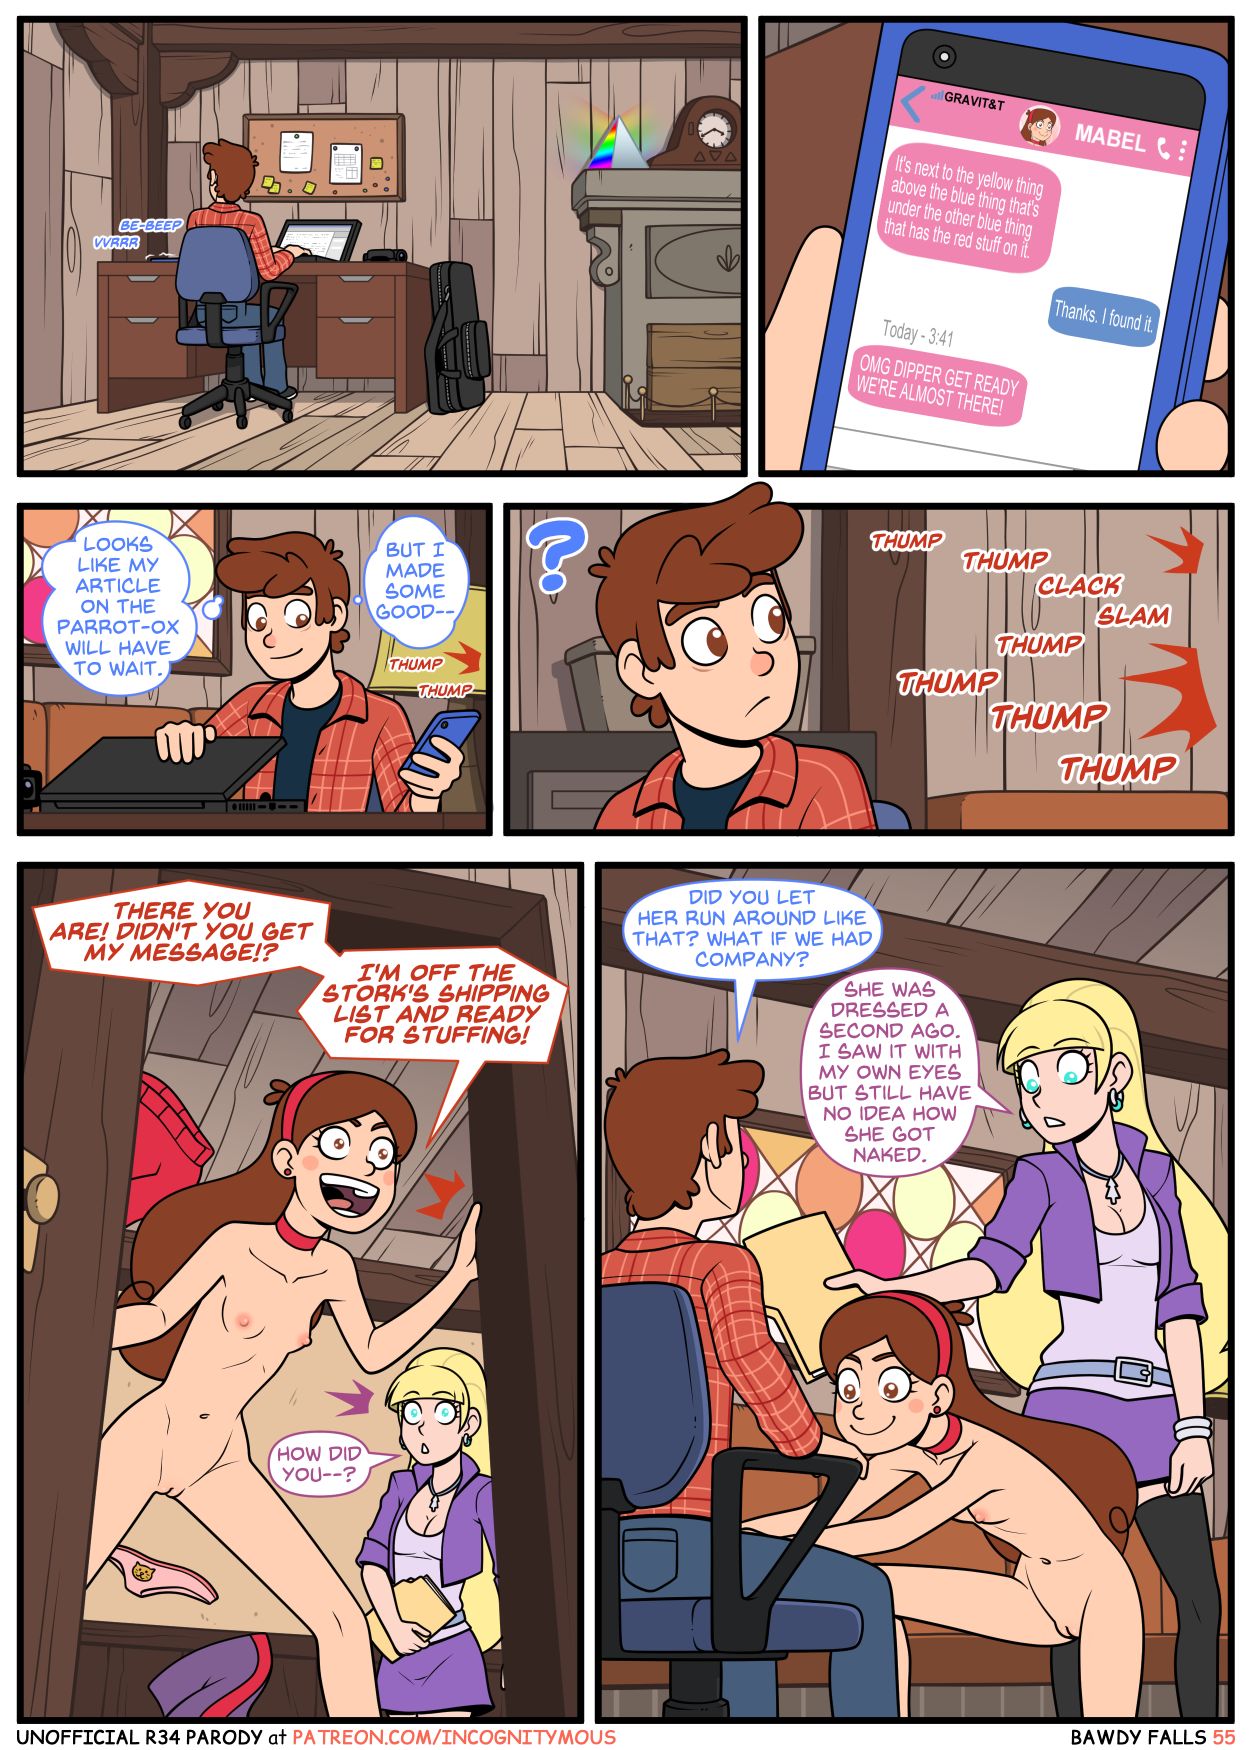 Post 2880620 Comic Dipperpines Gravityfalls Incognitymous Mabelpines Pacificanorthwest 